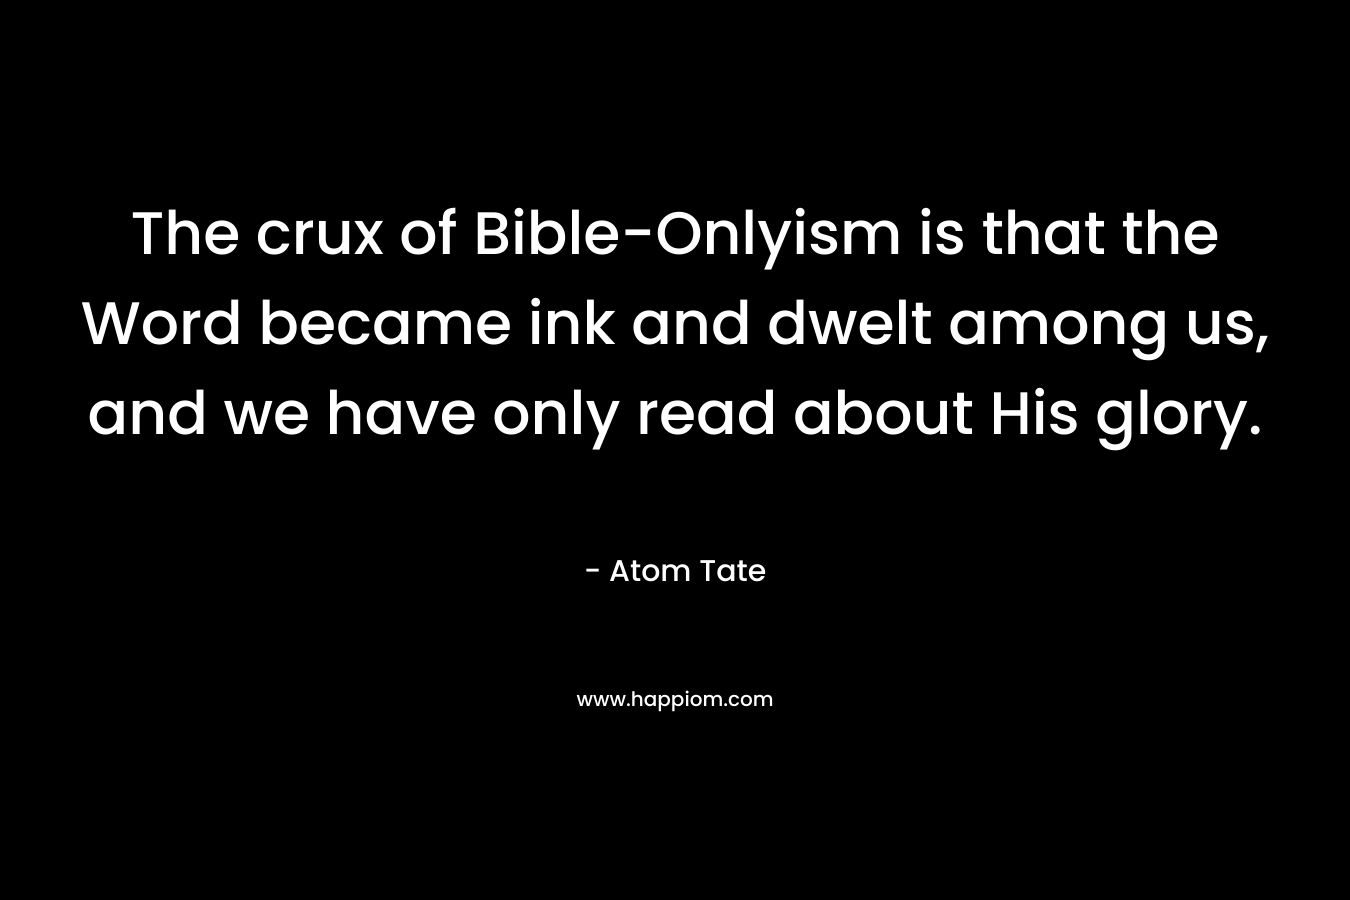 The crux of Bible-Onlyism is that the Word became ink and dwelt among us, and we have only read about His glory. – Atom Tate